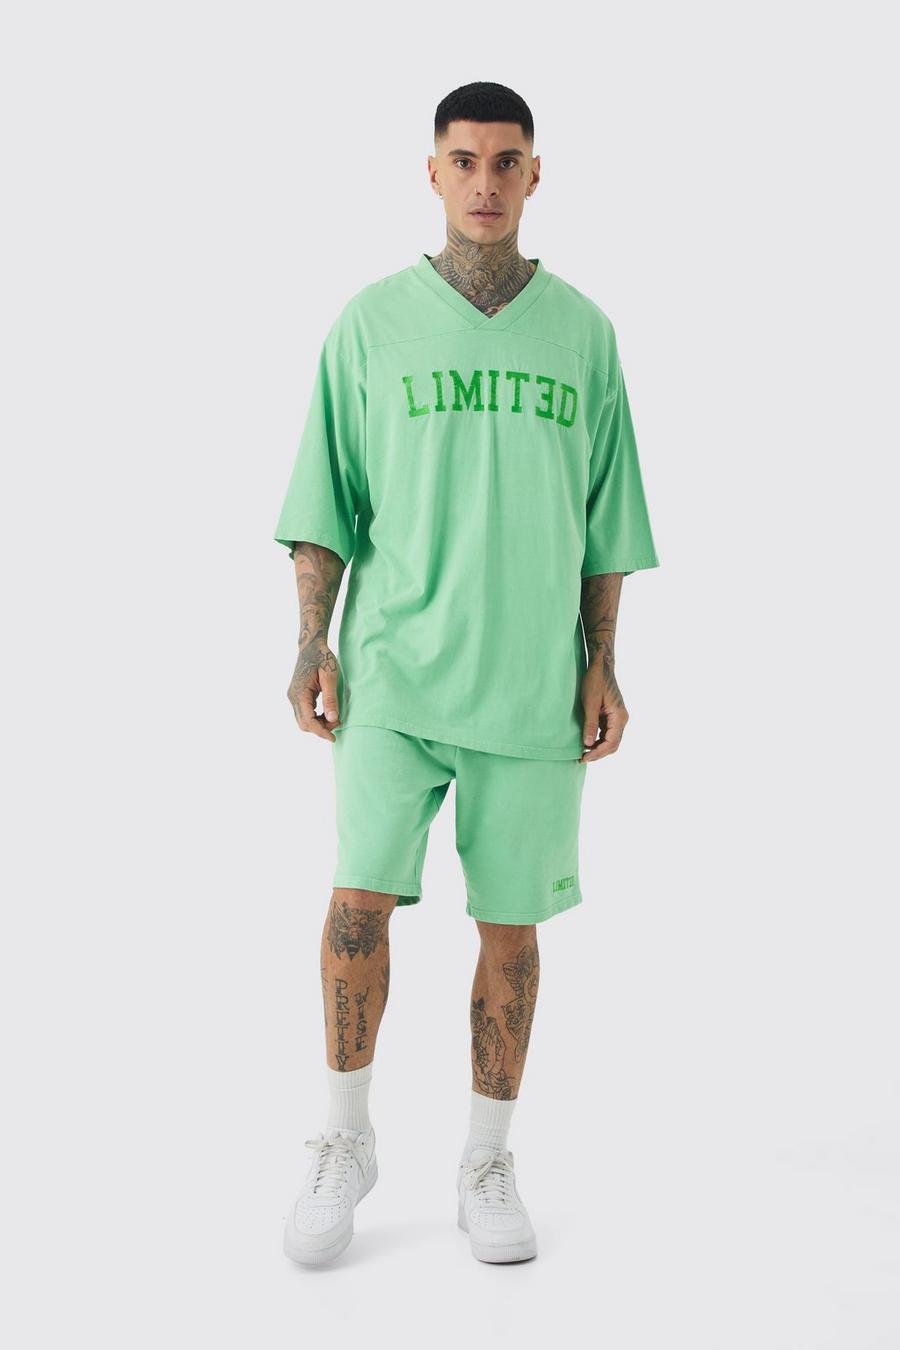 Green Tall Embroidery Limited Football T-shirt & Short Set image number 1